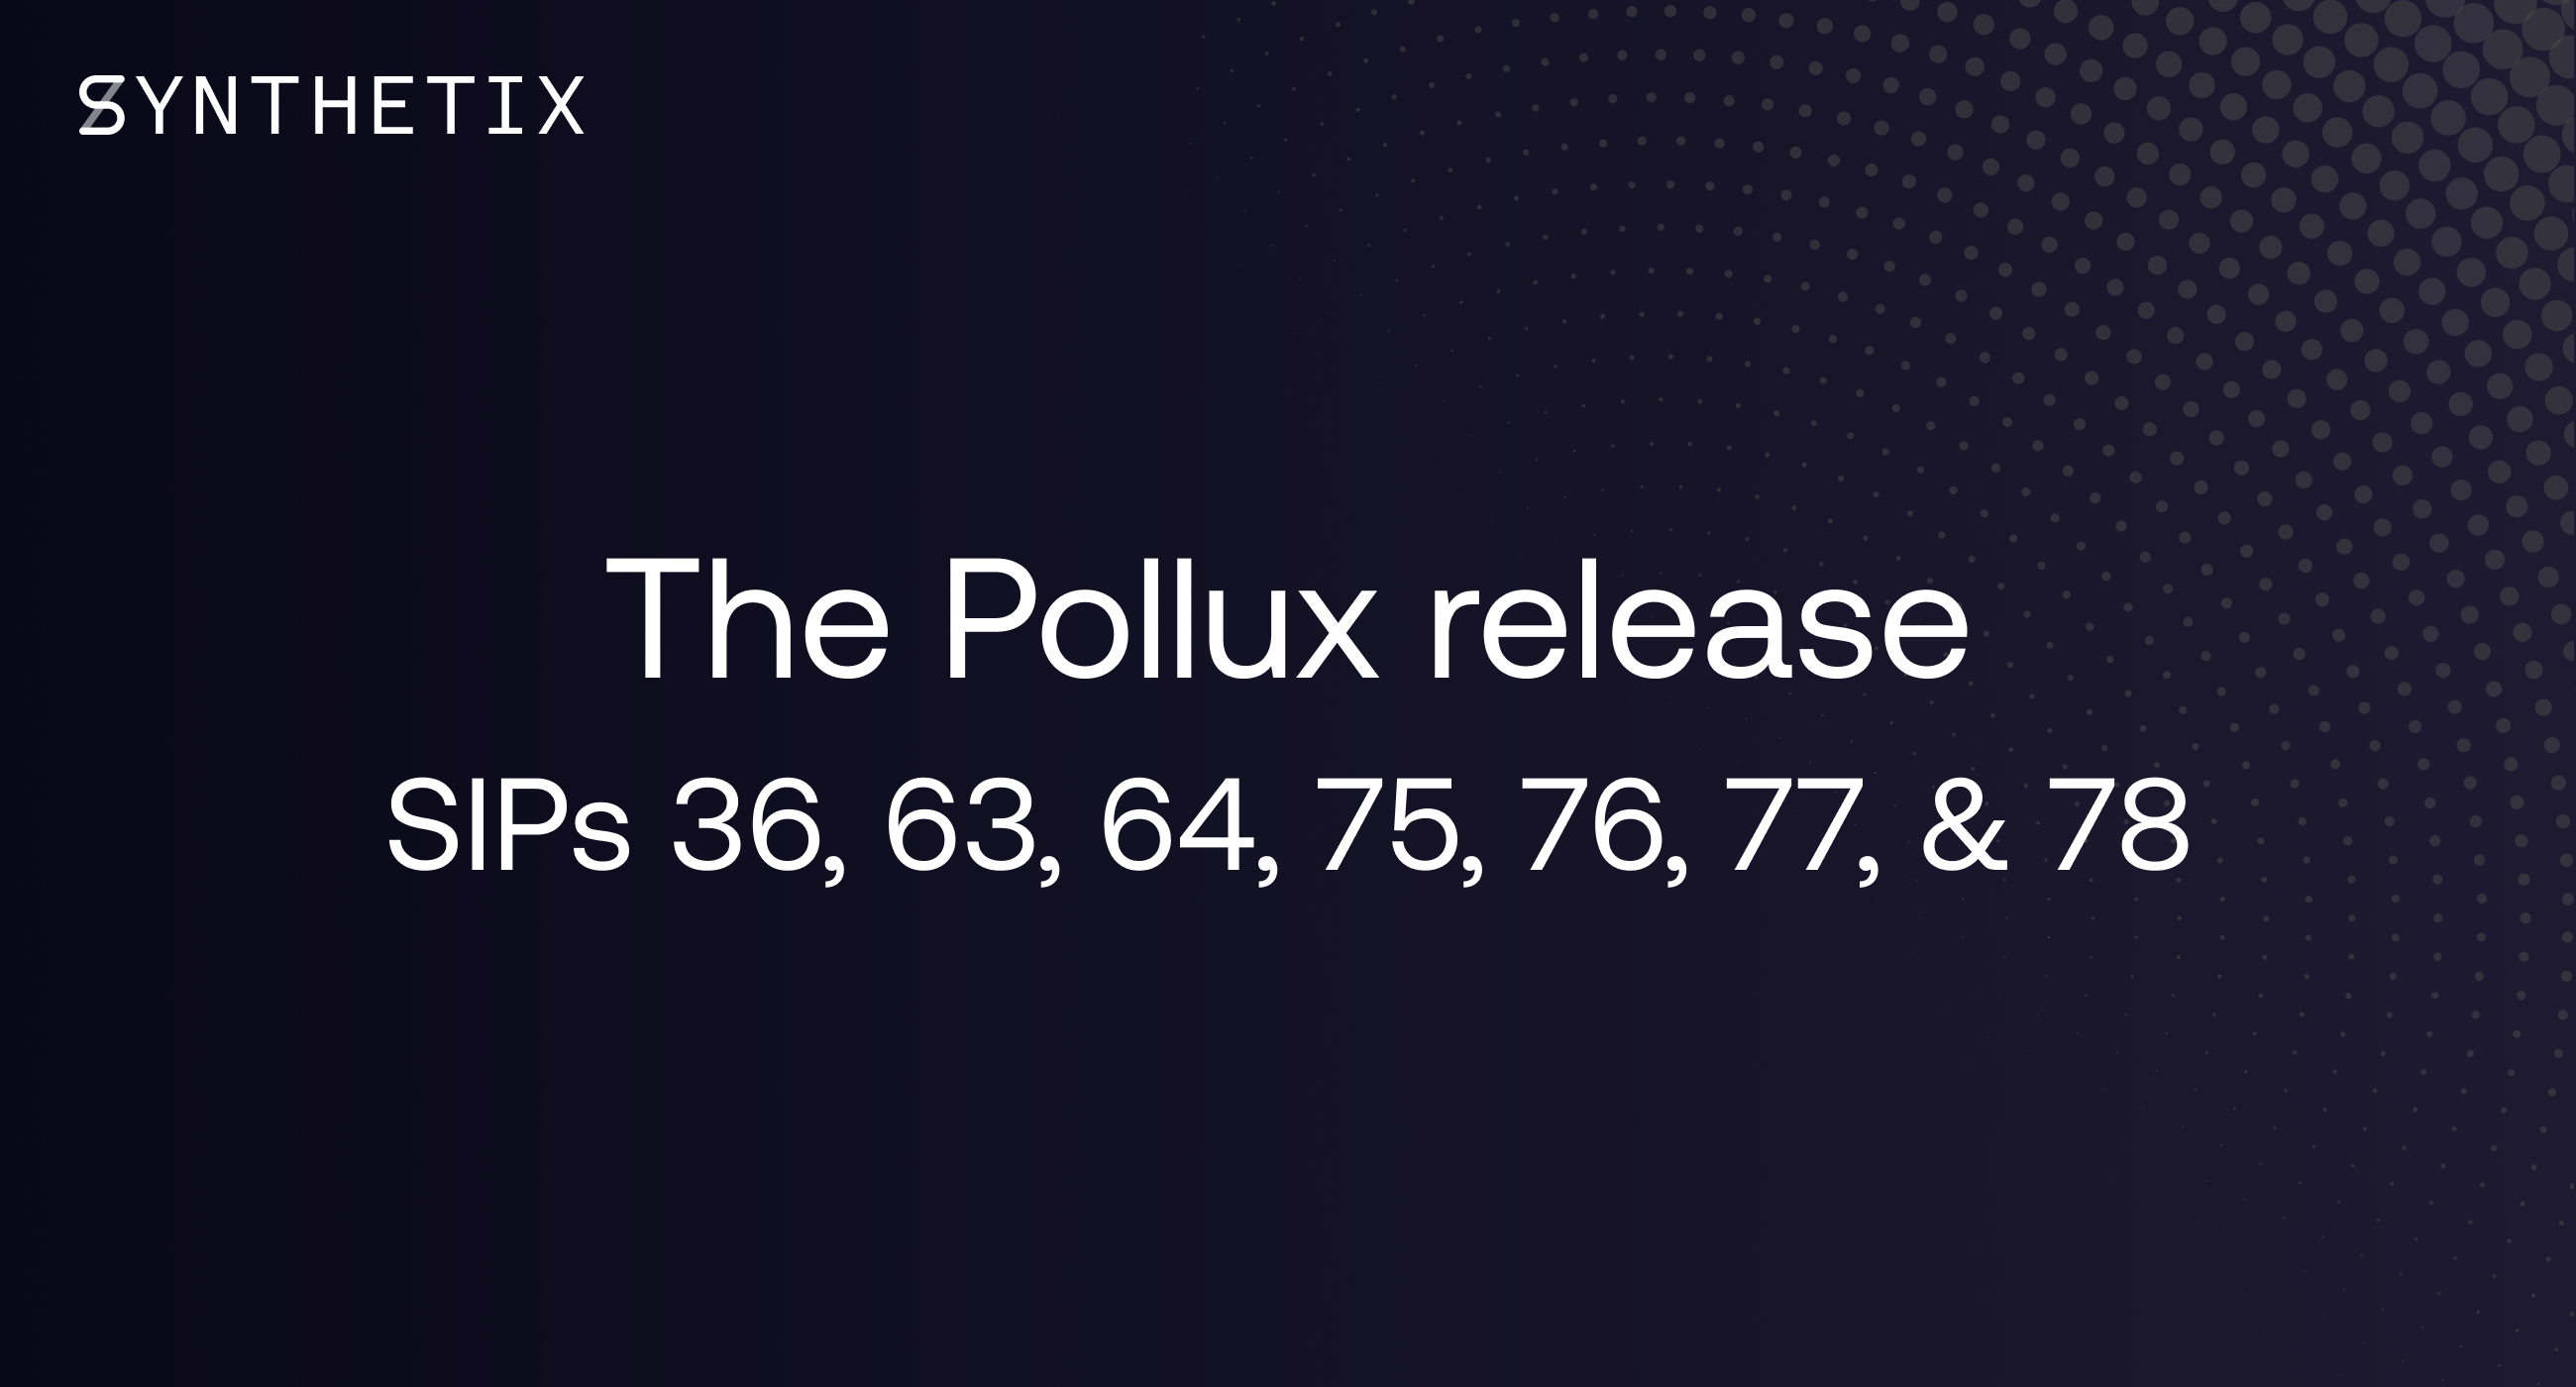 The Pollux release